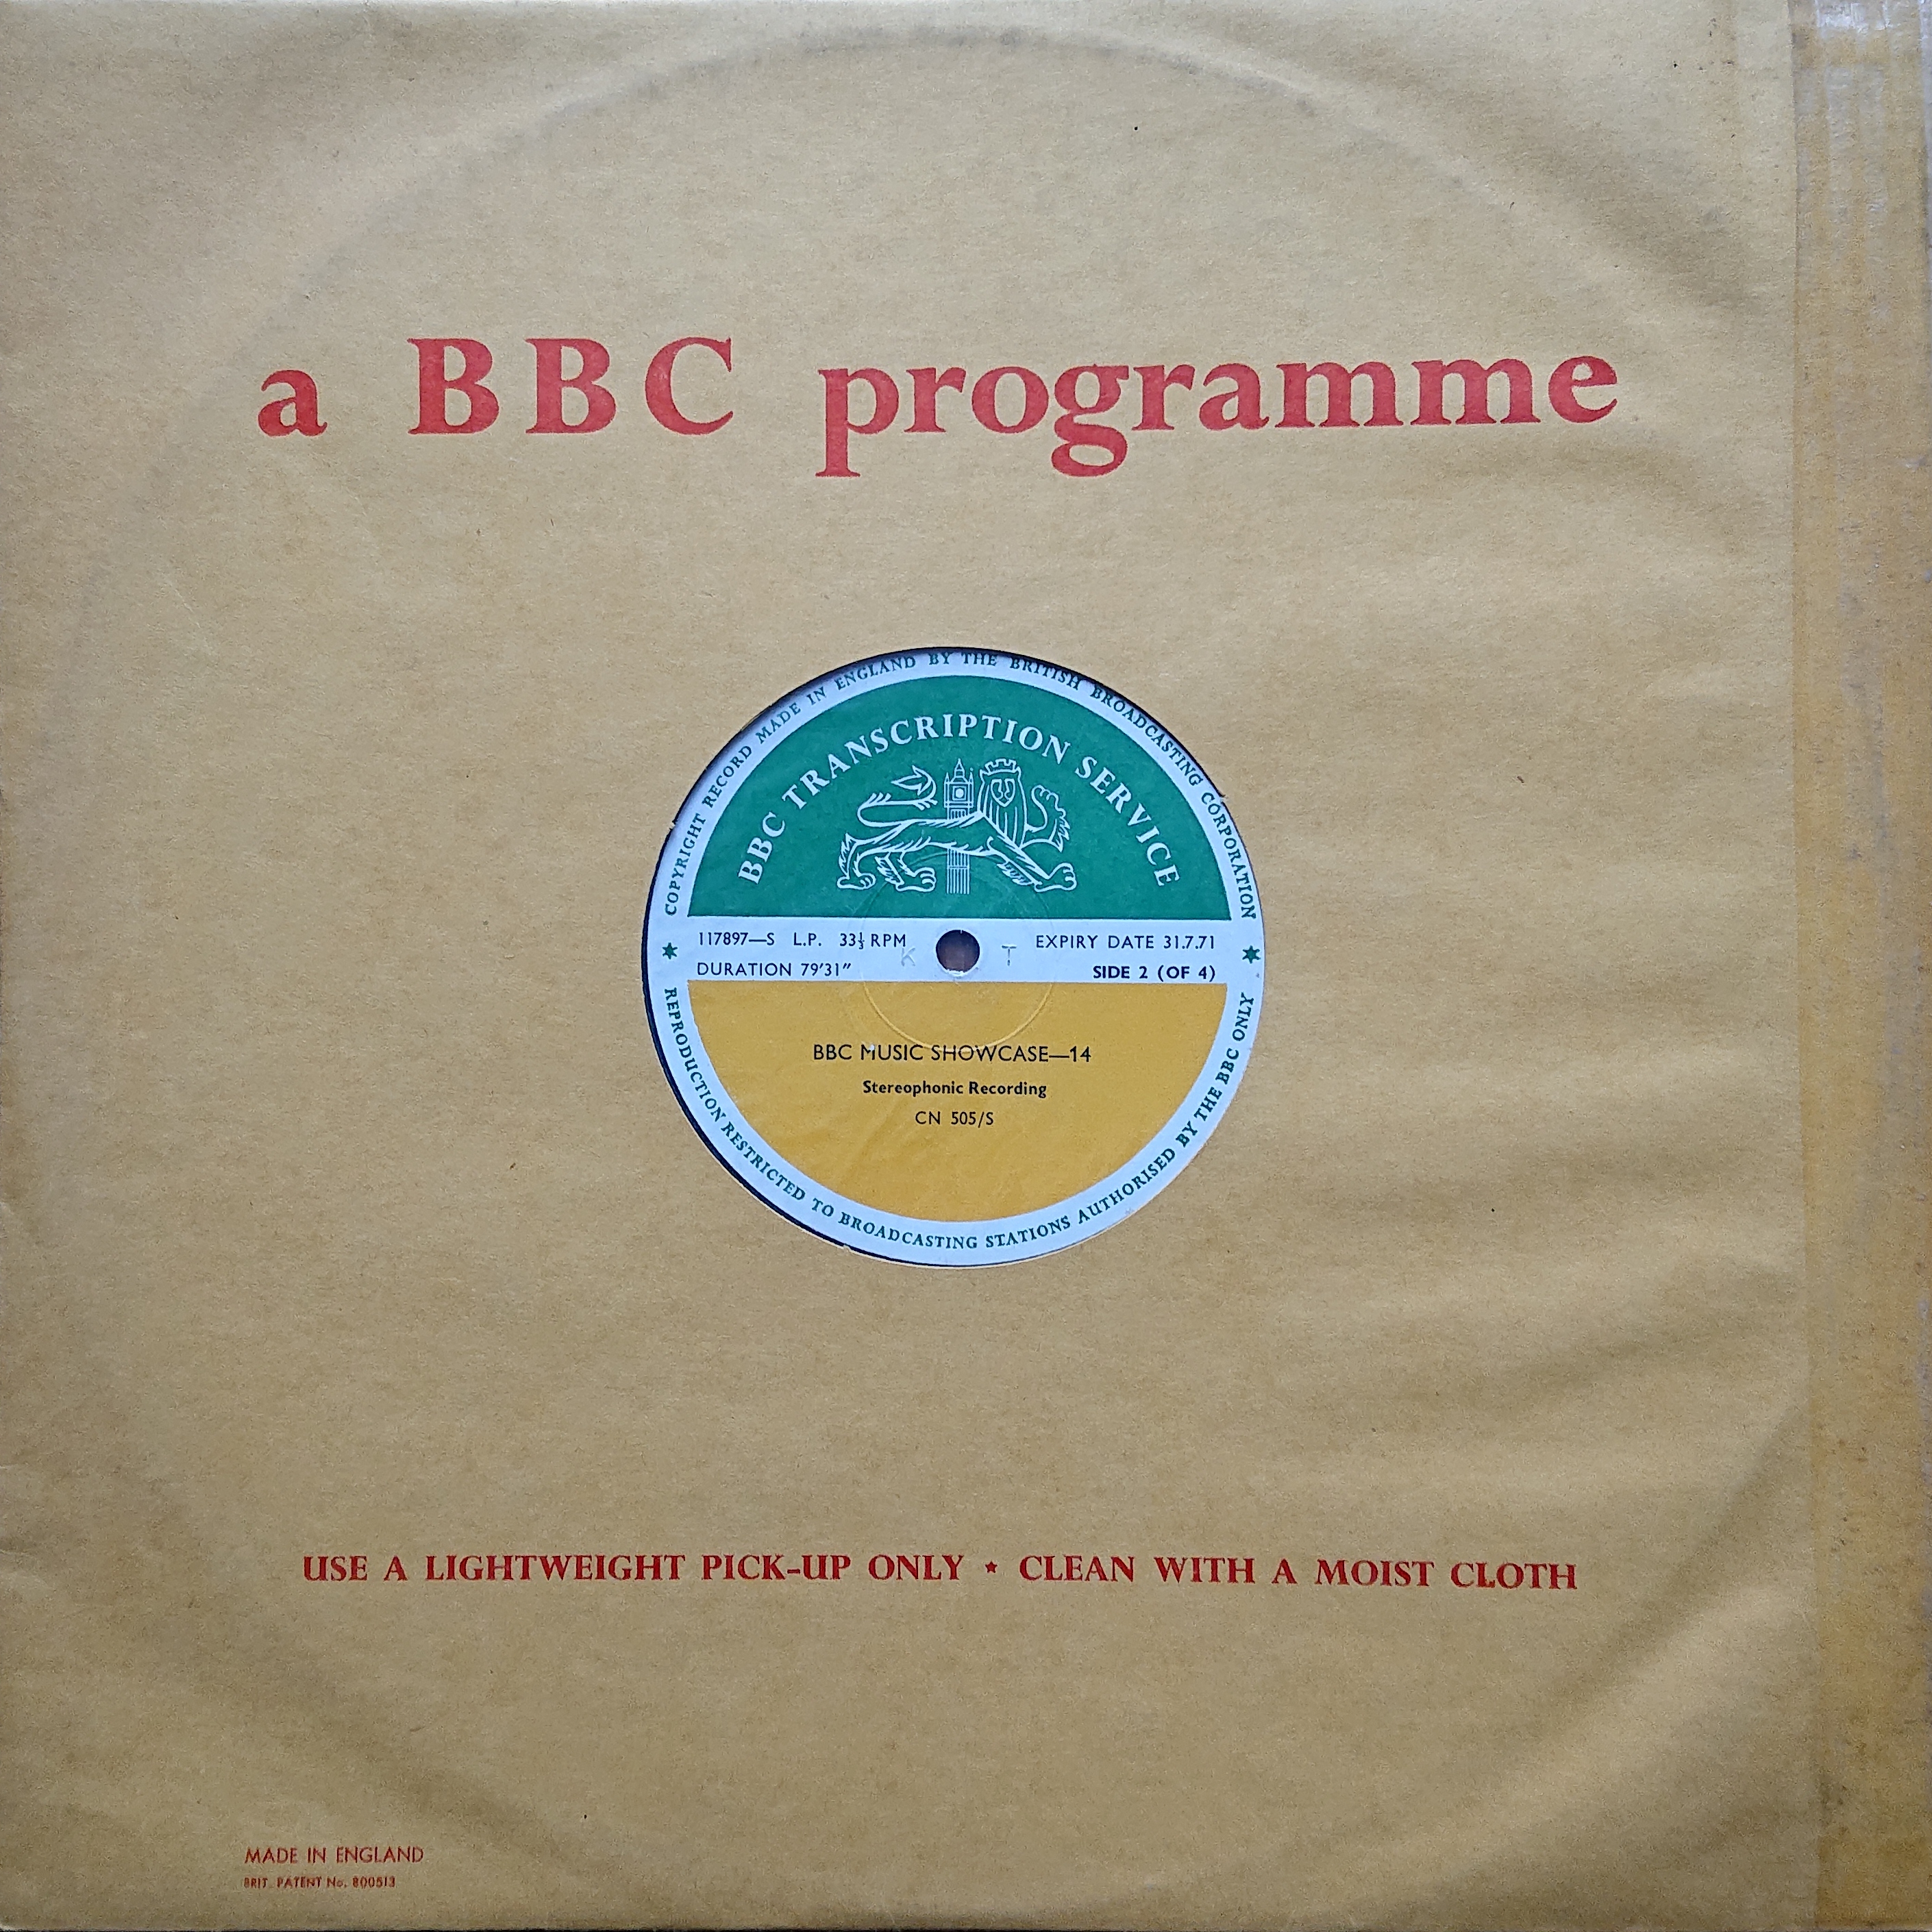 Picture of CN 505 S 28 BBC music showcase - 14 (Sides 2 & 4) by artist Various from the BBC records and Tapes library